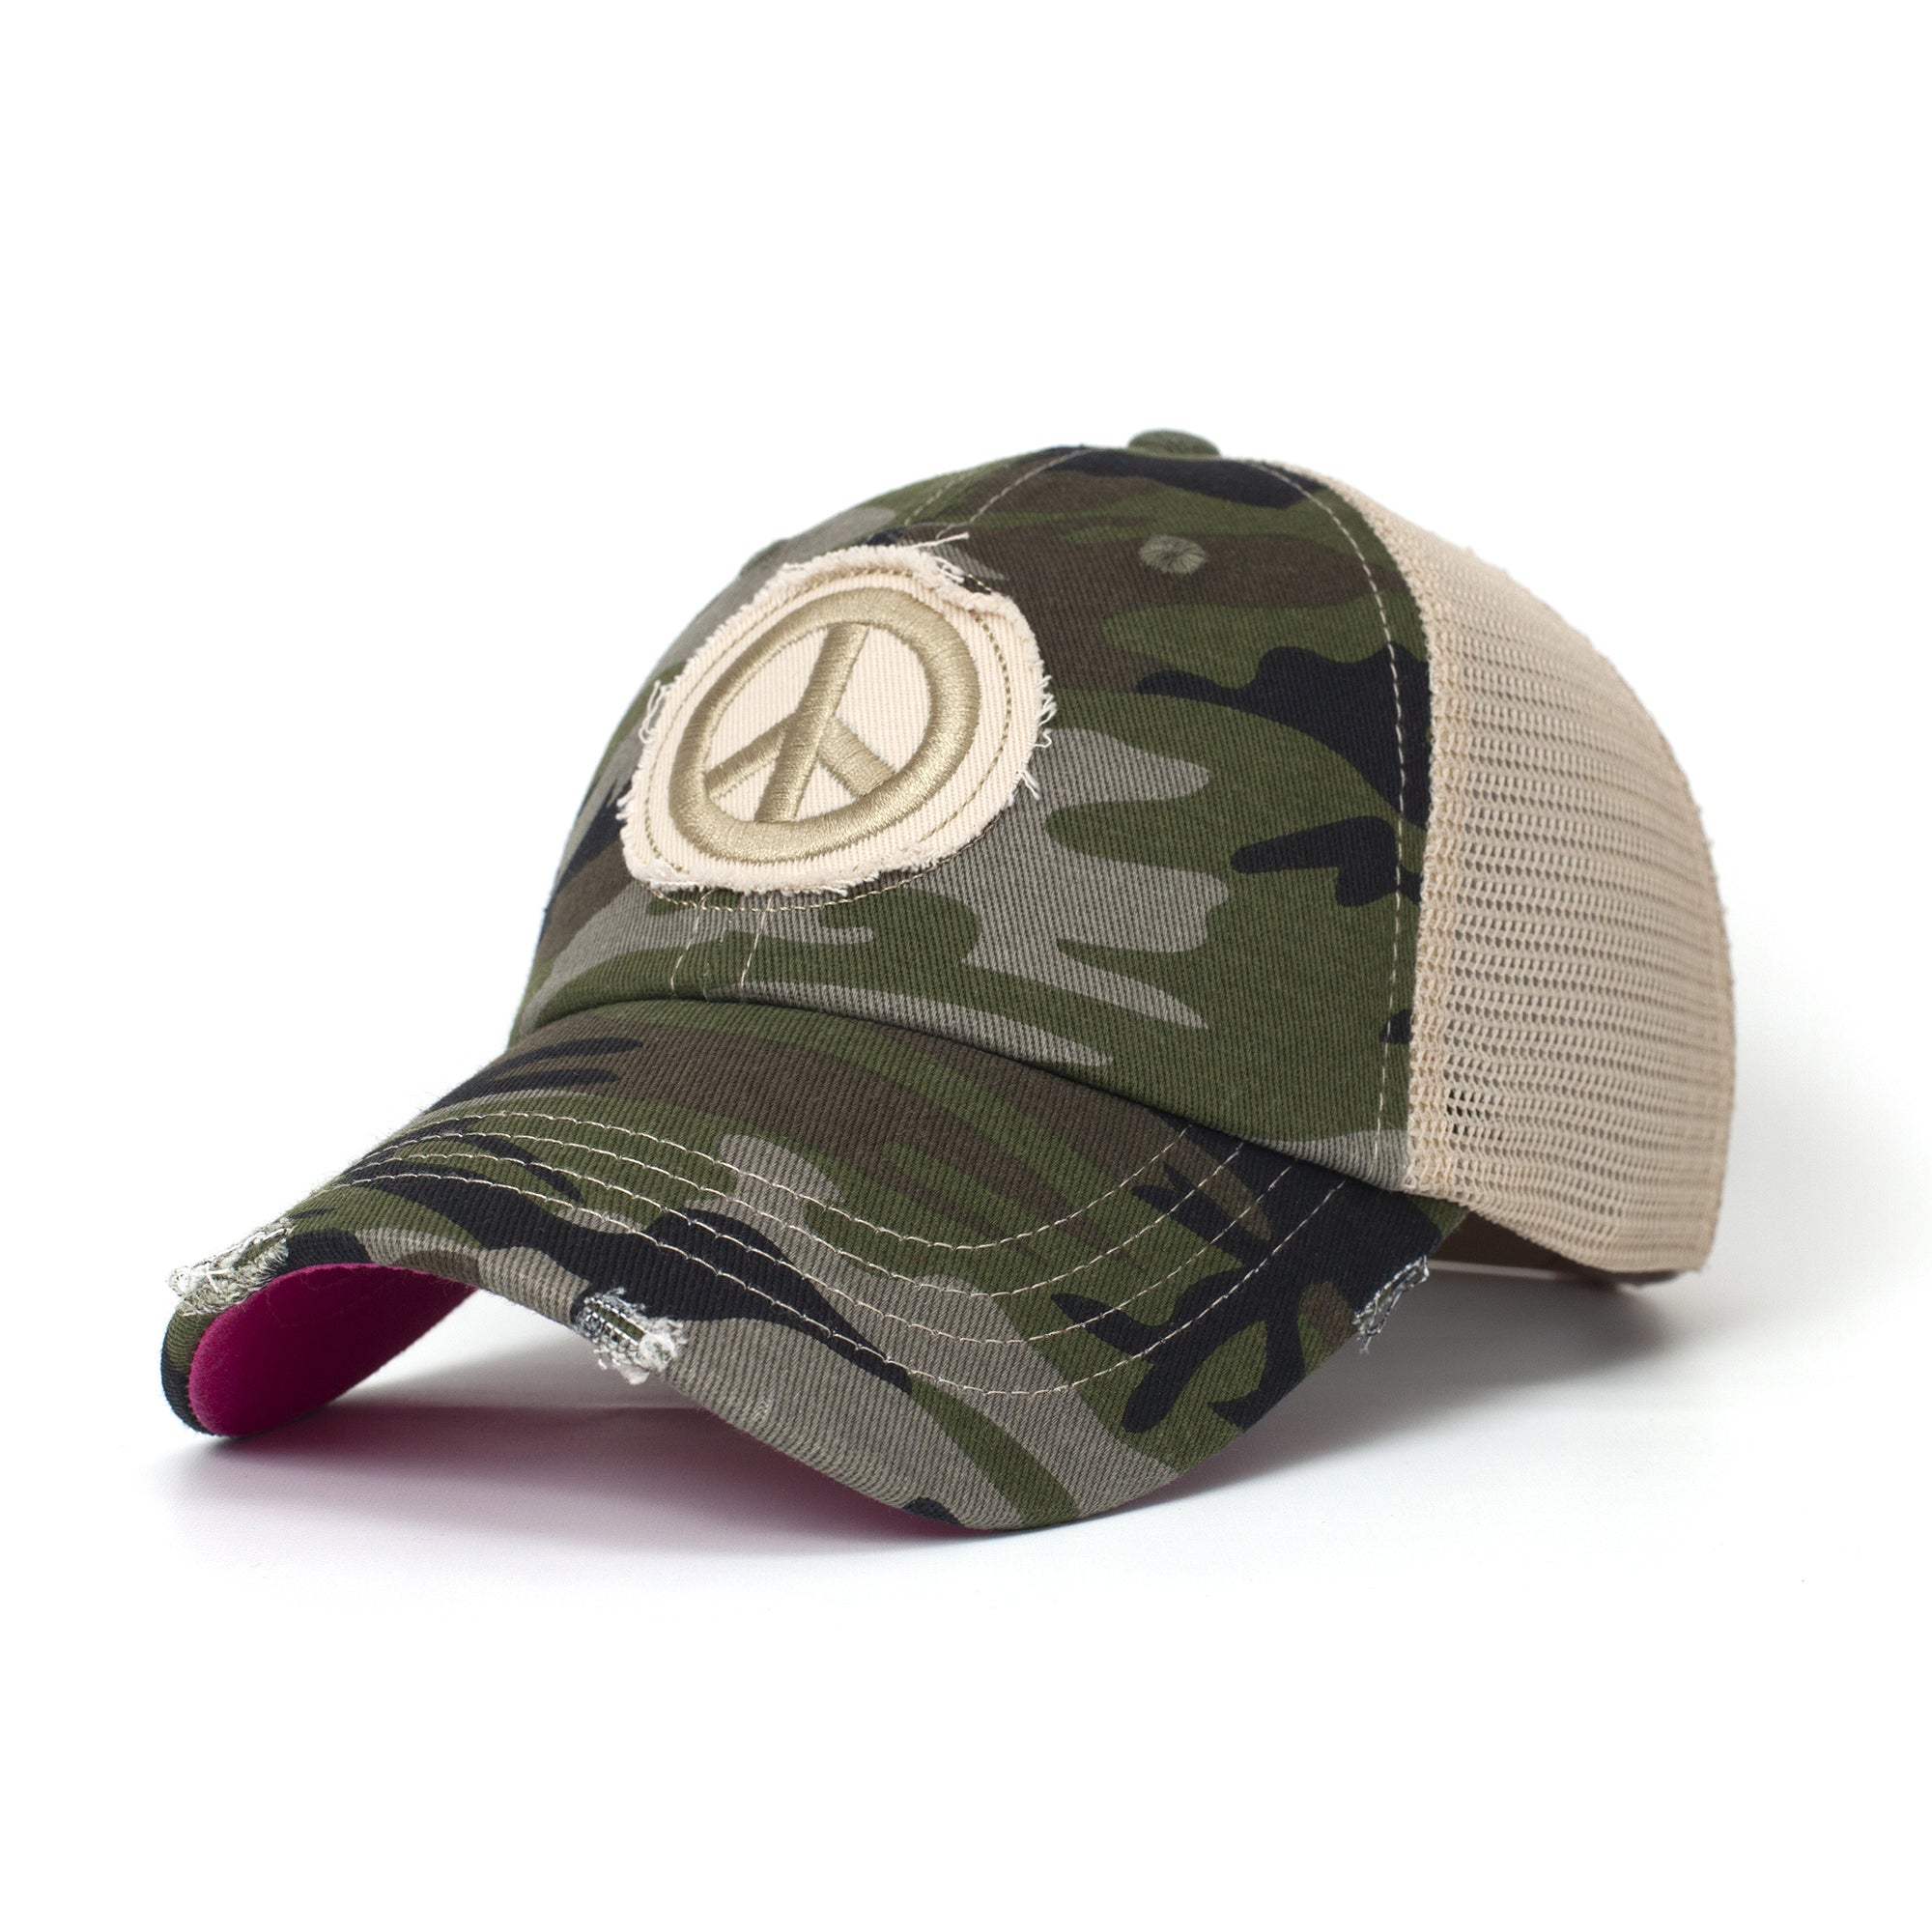 Women’s Hats, Women’s Trucker Hats, Trucker Hats, Hats, Adjustable Hats, Everyday Use, Comfortable, Camouflage, Peace Sign, Peaceful, Pattern